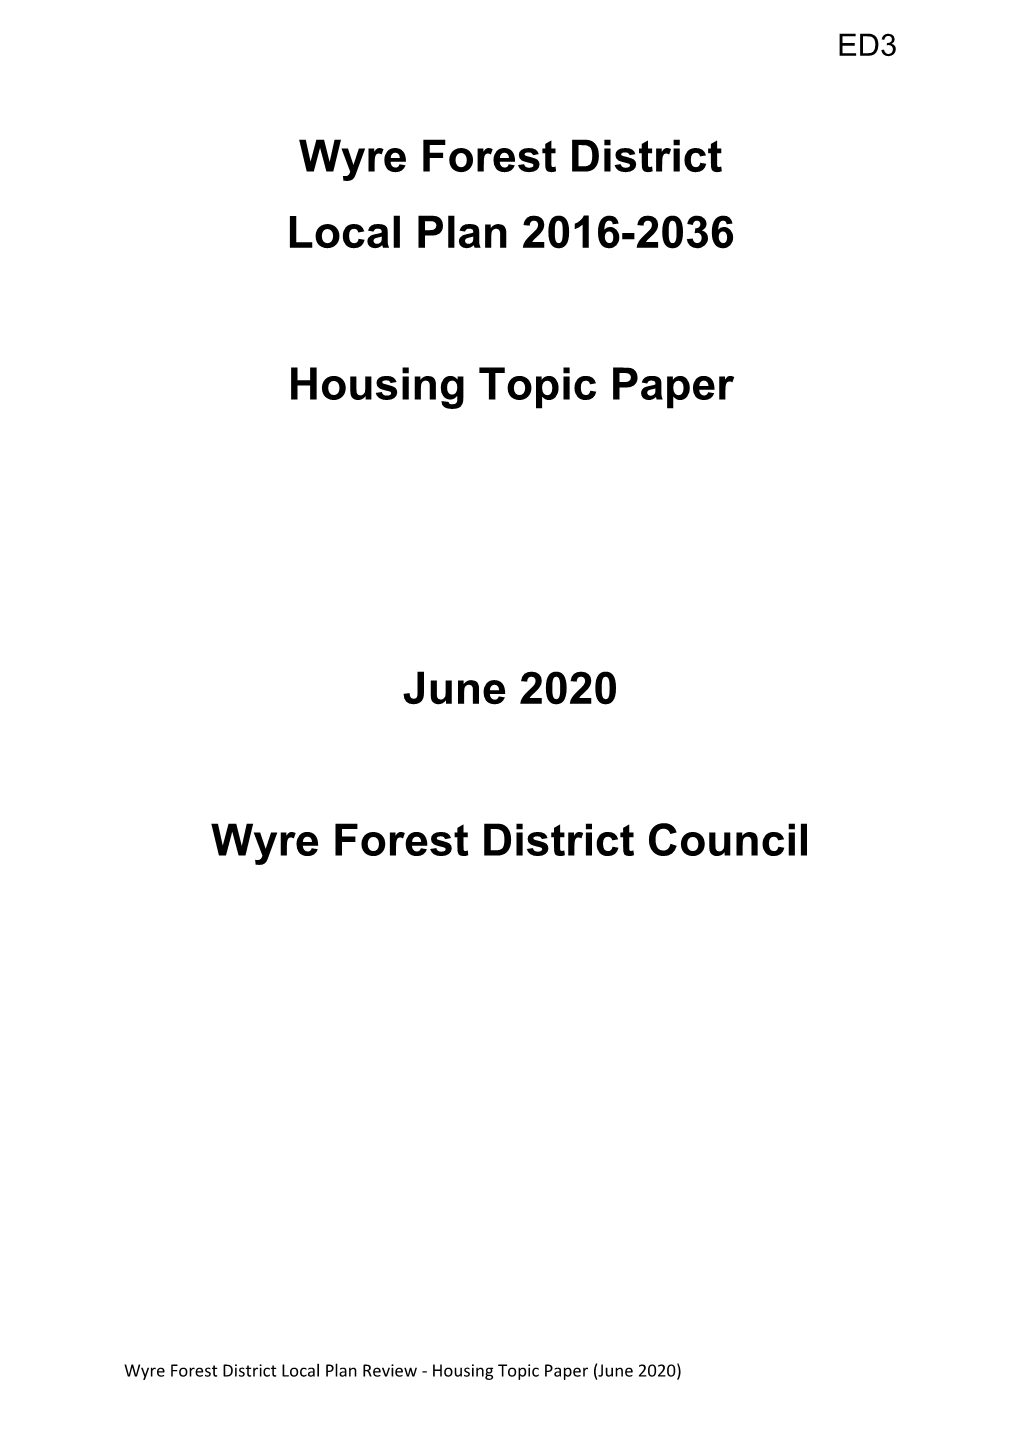 Wyre Forest District Council Housing Topic Paper